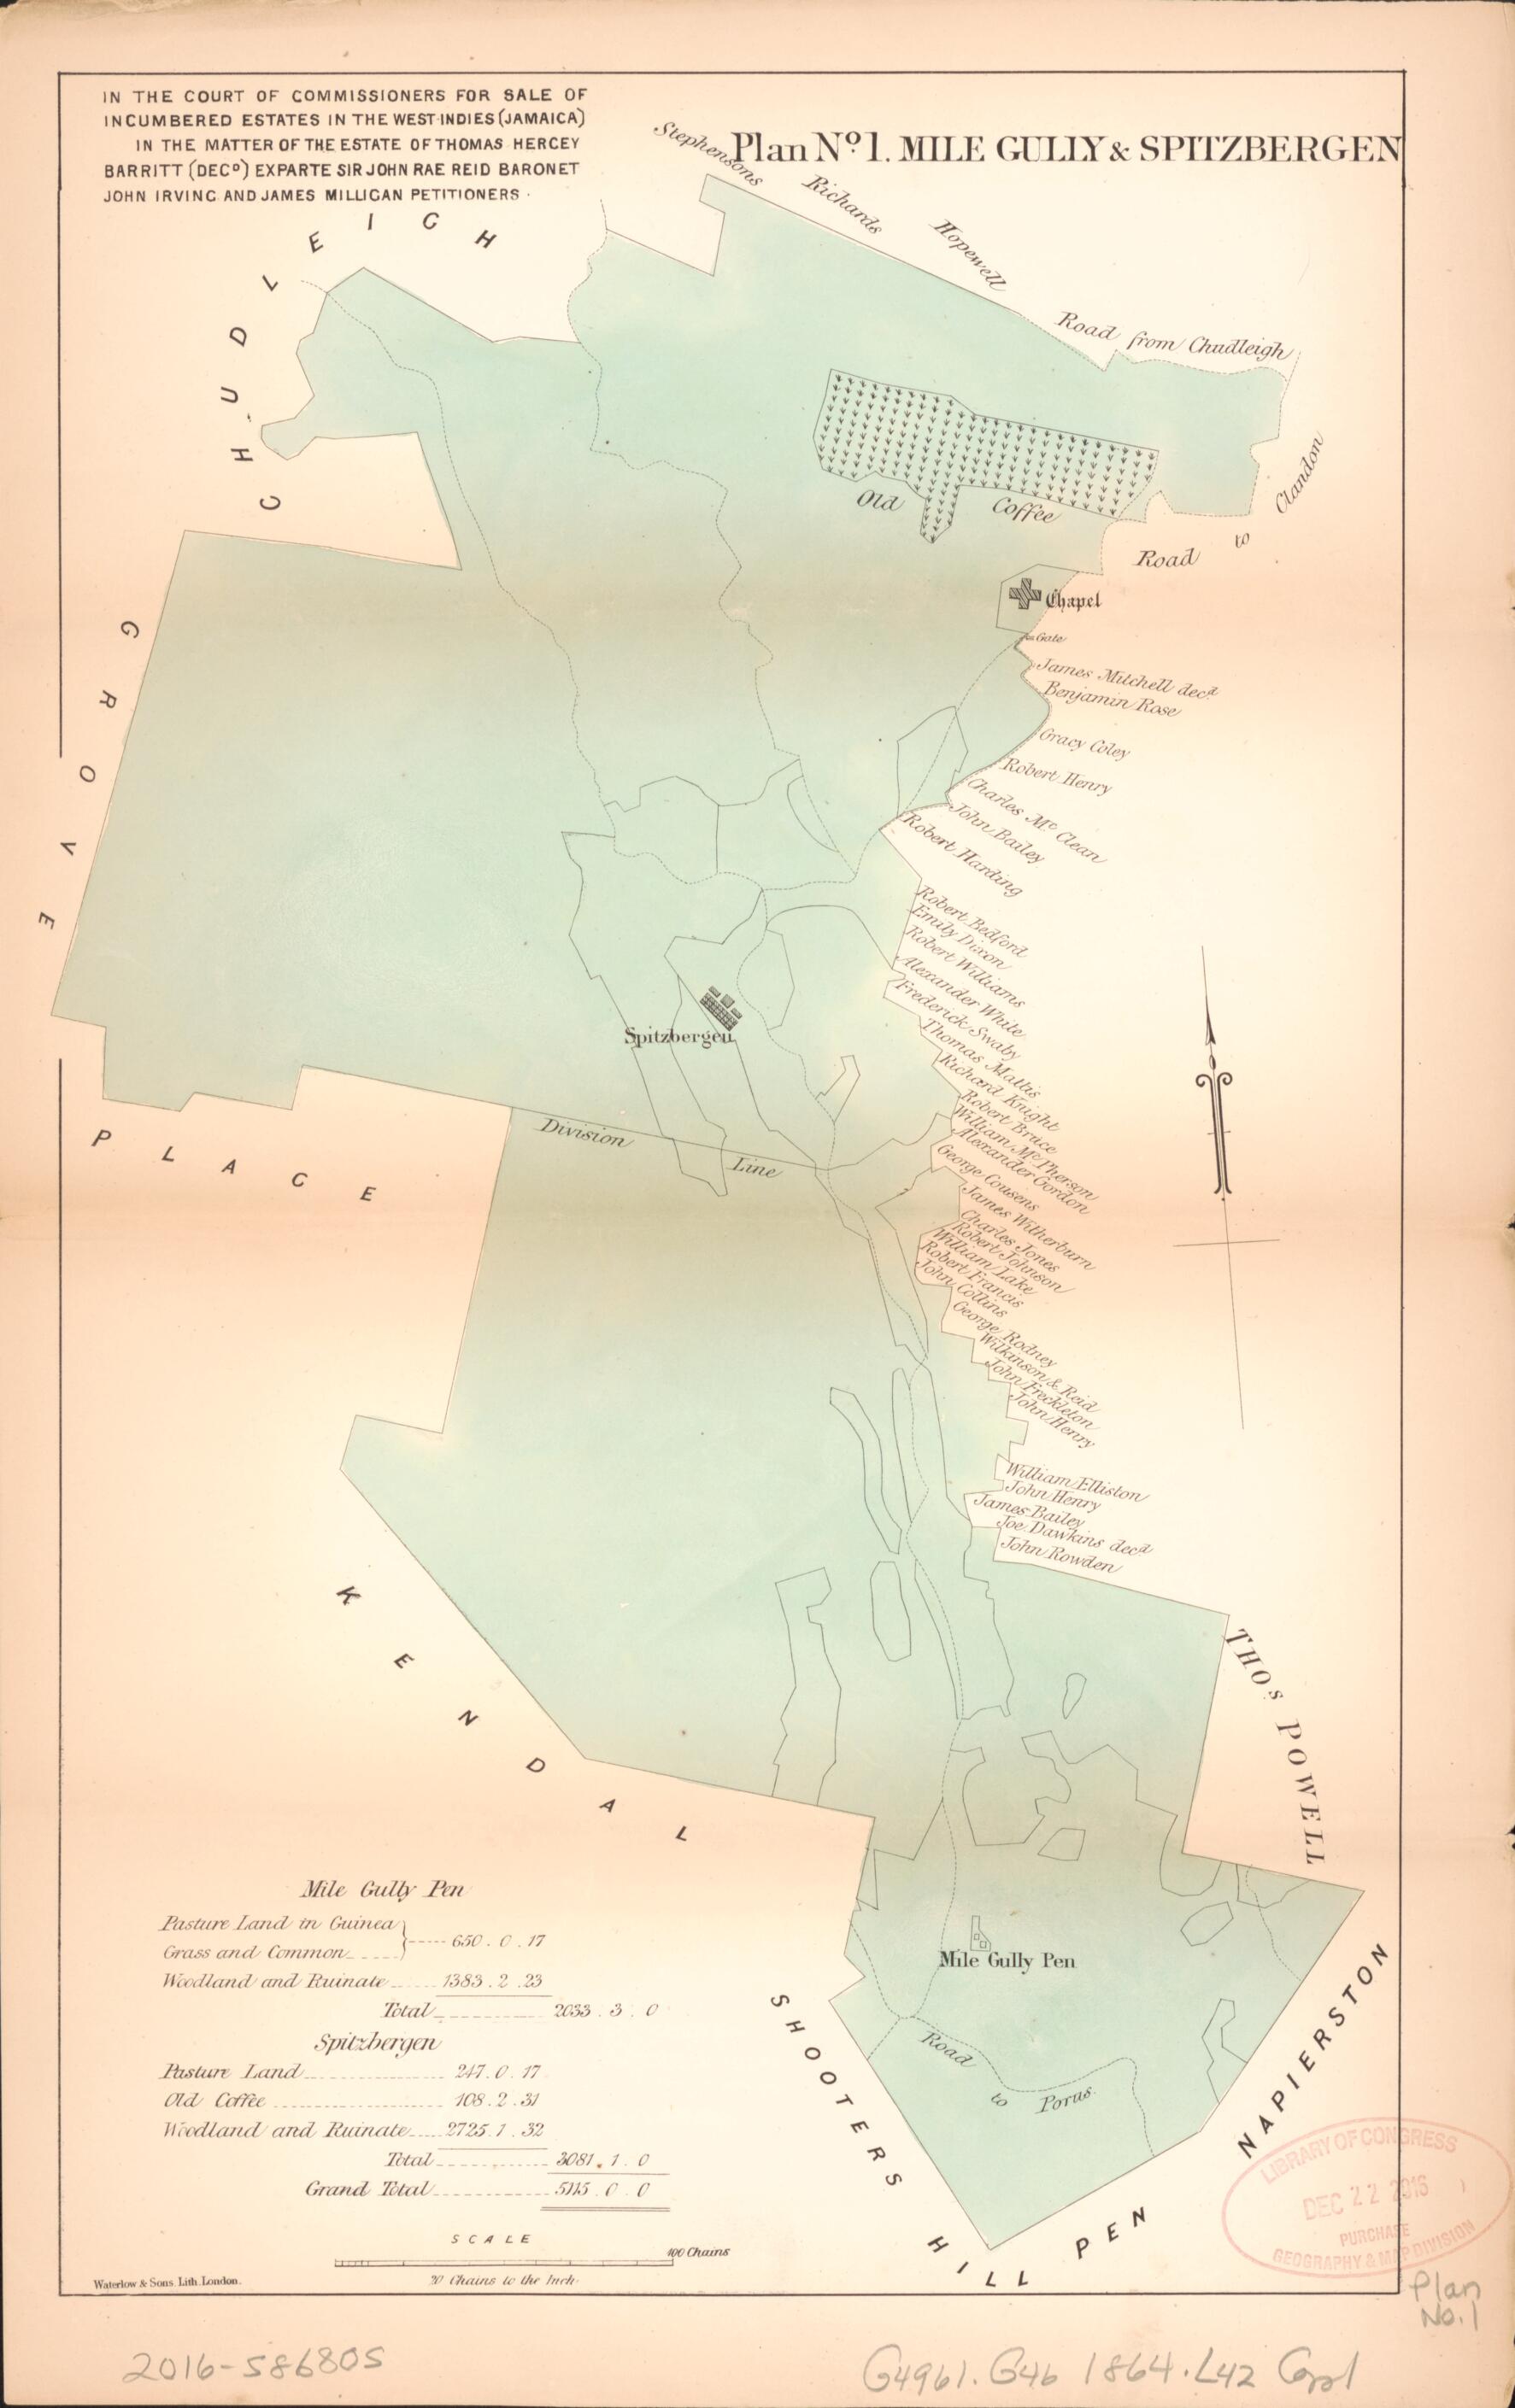 This old map of Plan No. 1. Mile Gully and Spitzbergen from Encumbered Estates In the West Indies (Jamaica) from 1864 was created by Henry James Stonor in 1864